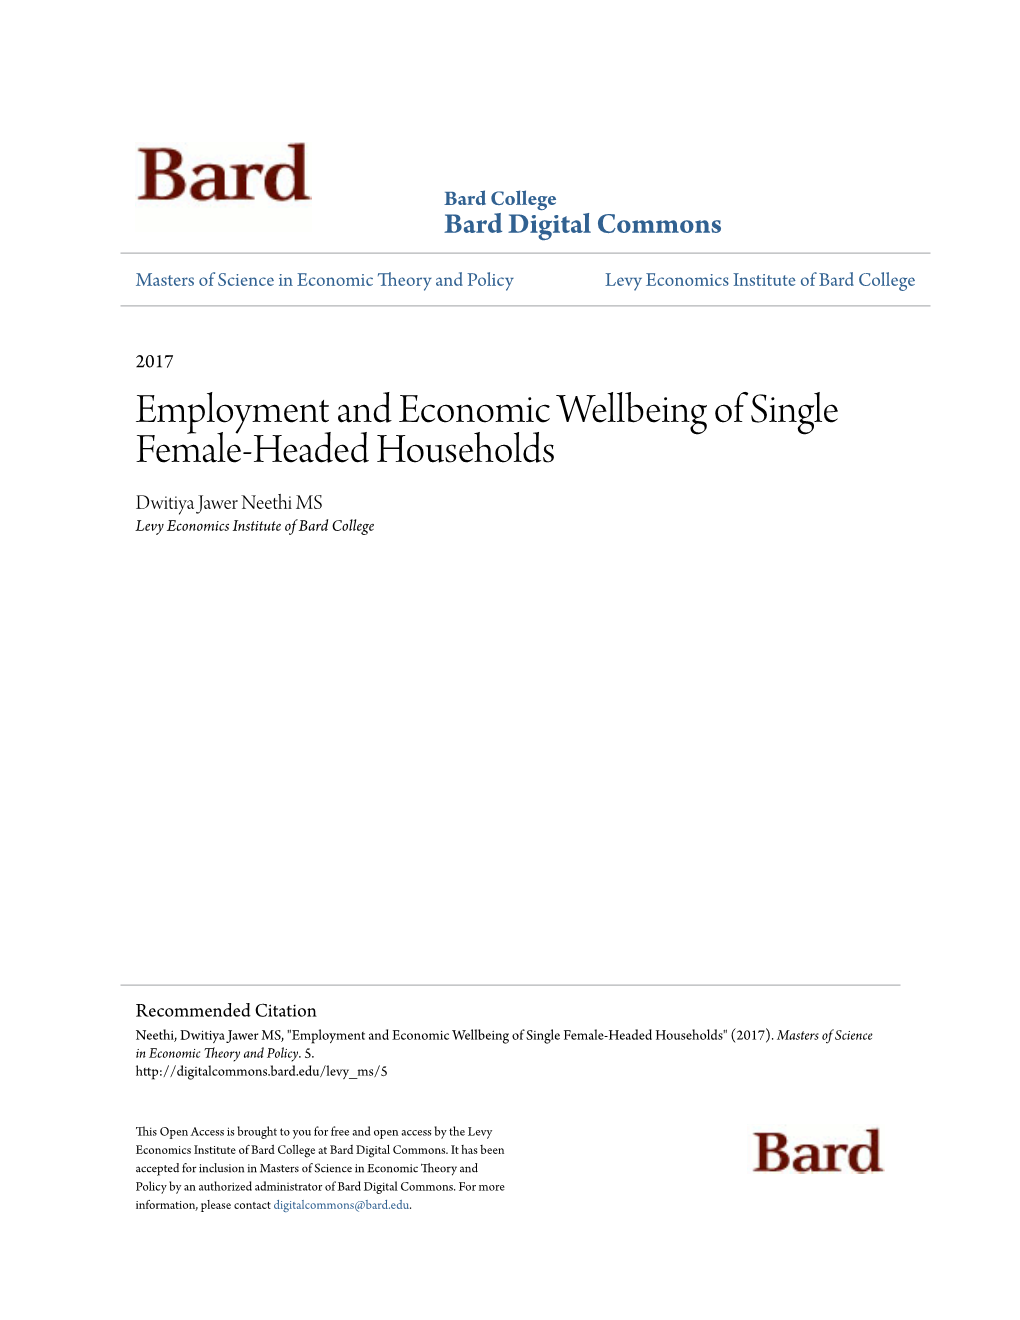 Employment and Economic Wellbeing of Single Female-Headed Households Dwitiya Jawer Neethi MS Levy Economics Institute of Bard College